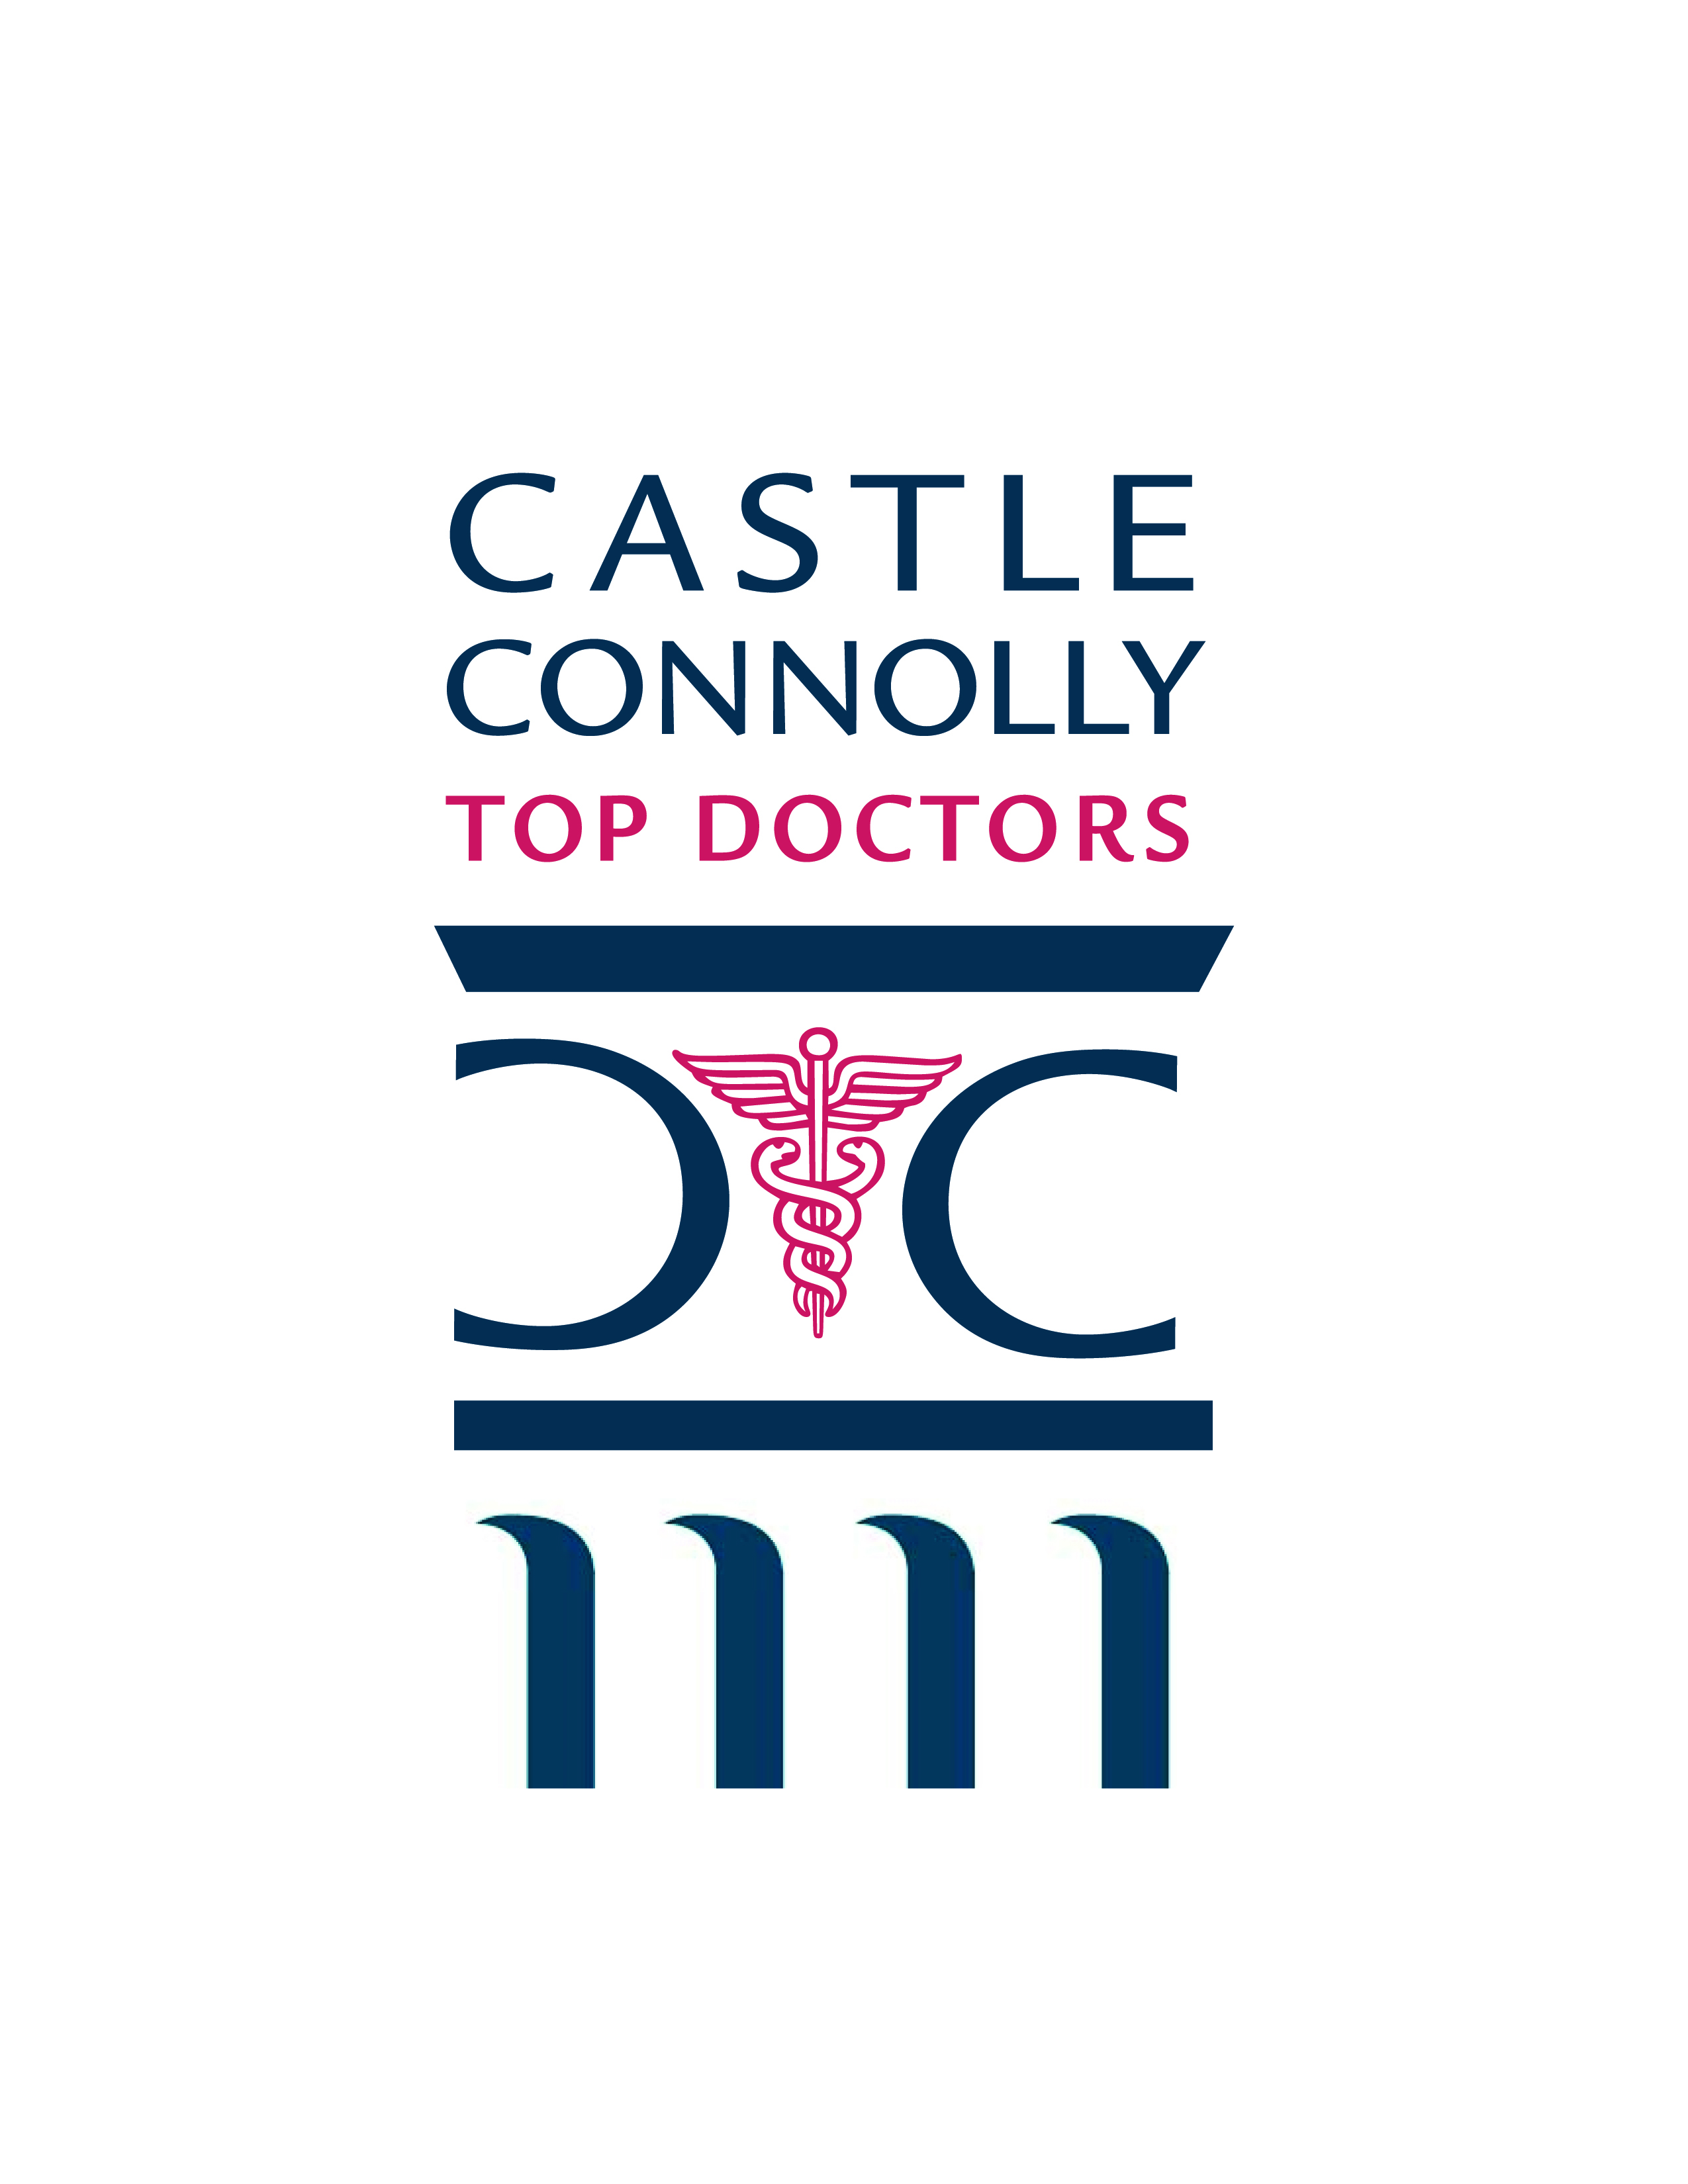 Castle Connolly Medical Ltd. Expands Its Top Doctors® to the European